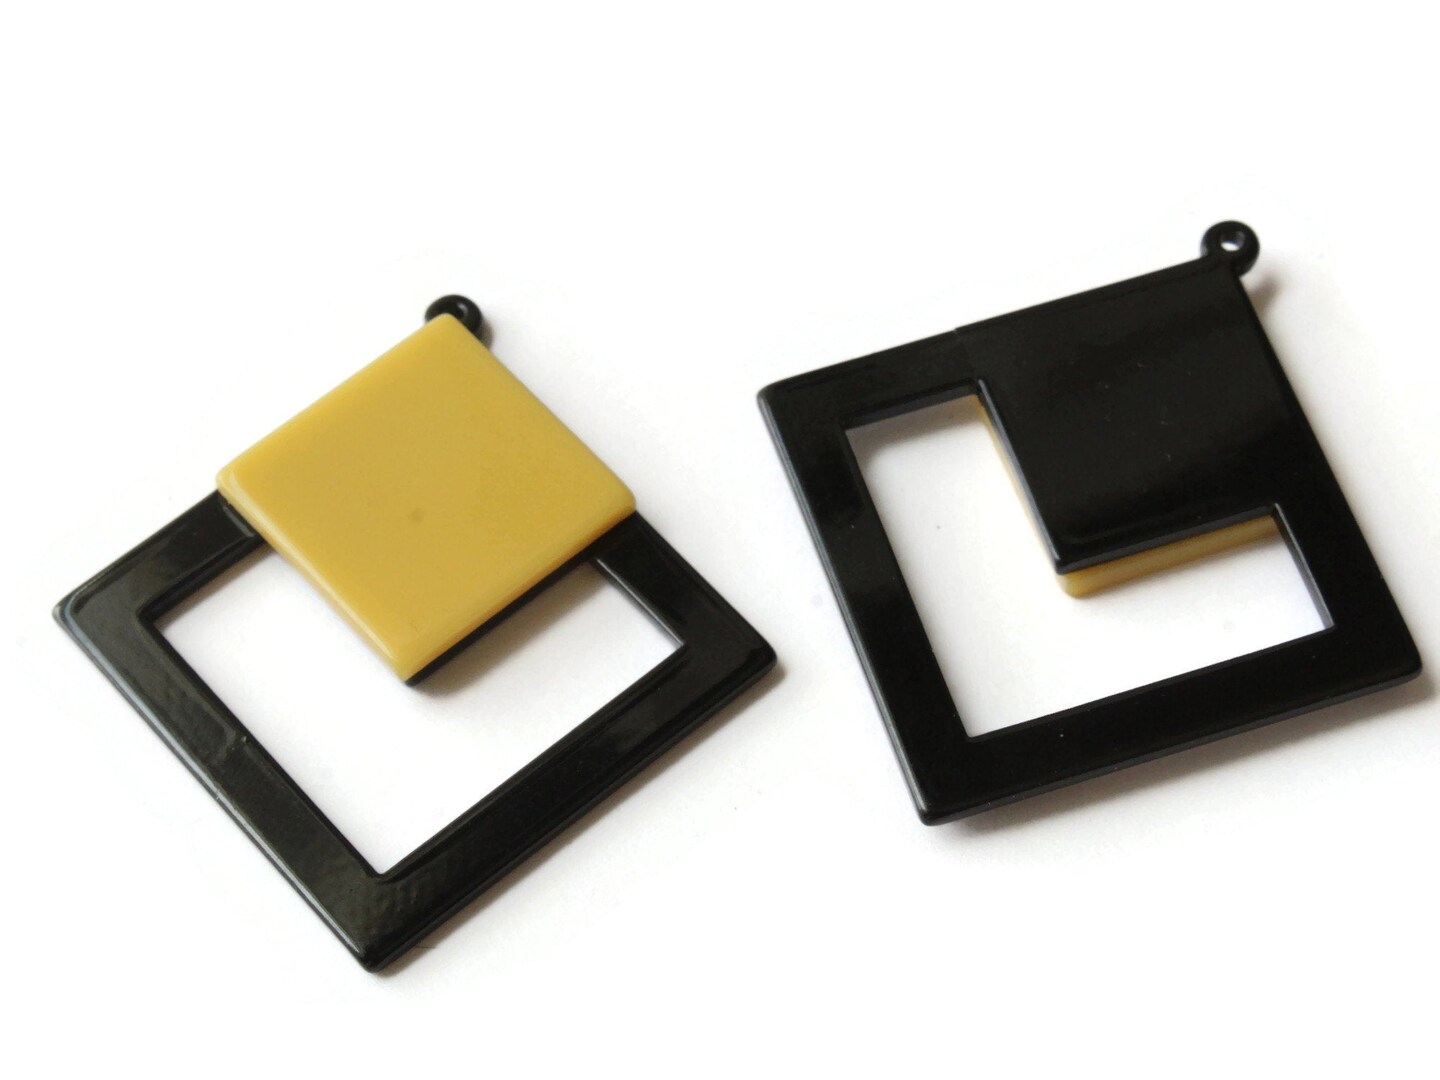 2 51mm Yellow and Black Double Square Resin Pendants